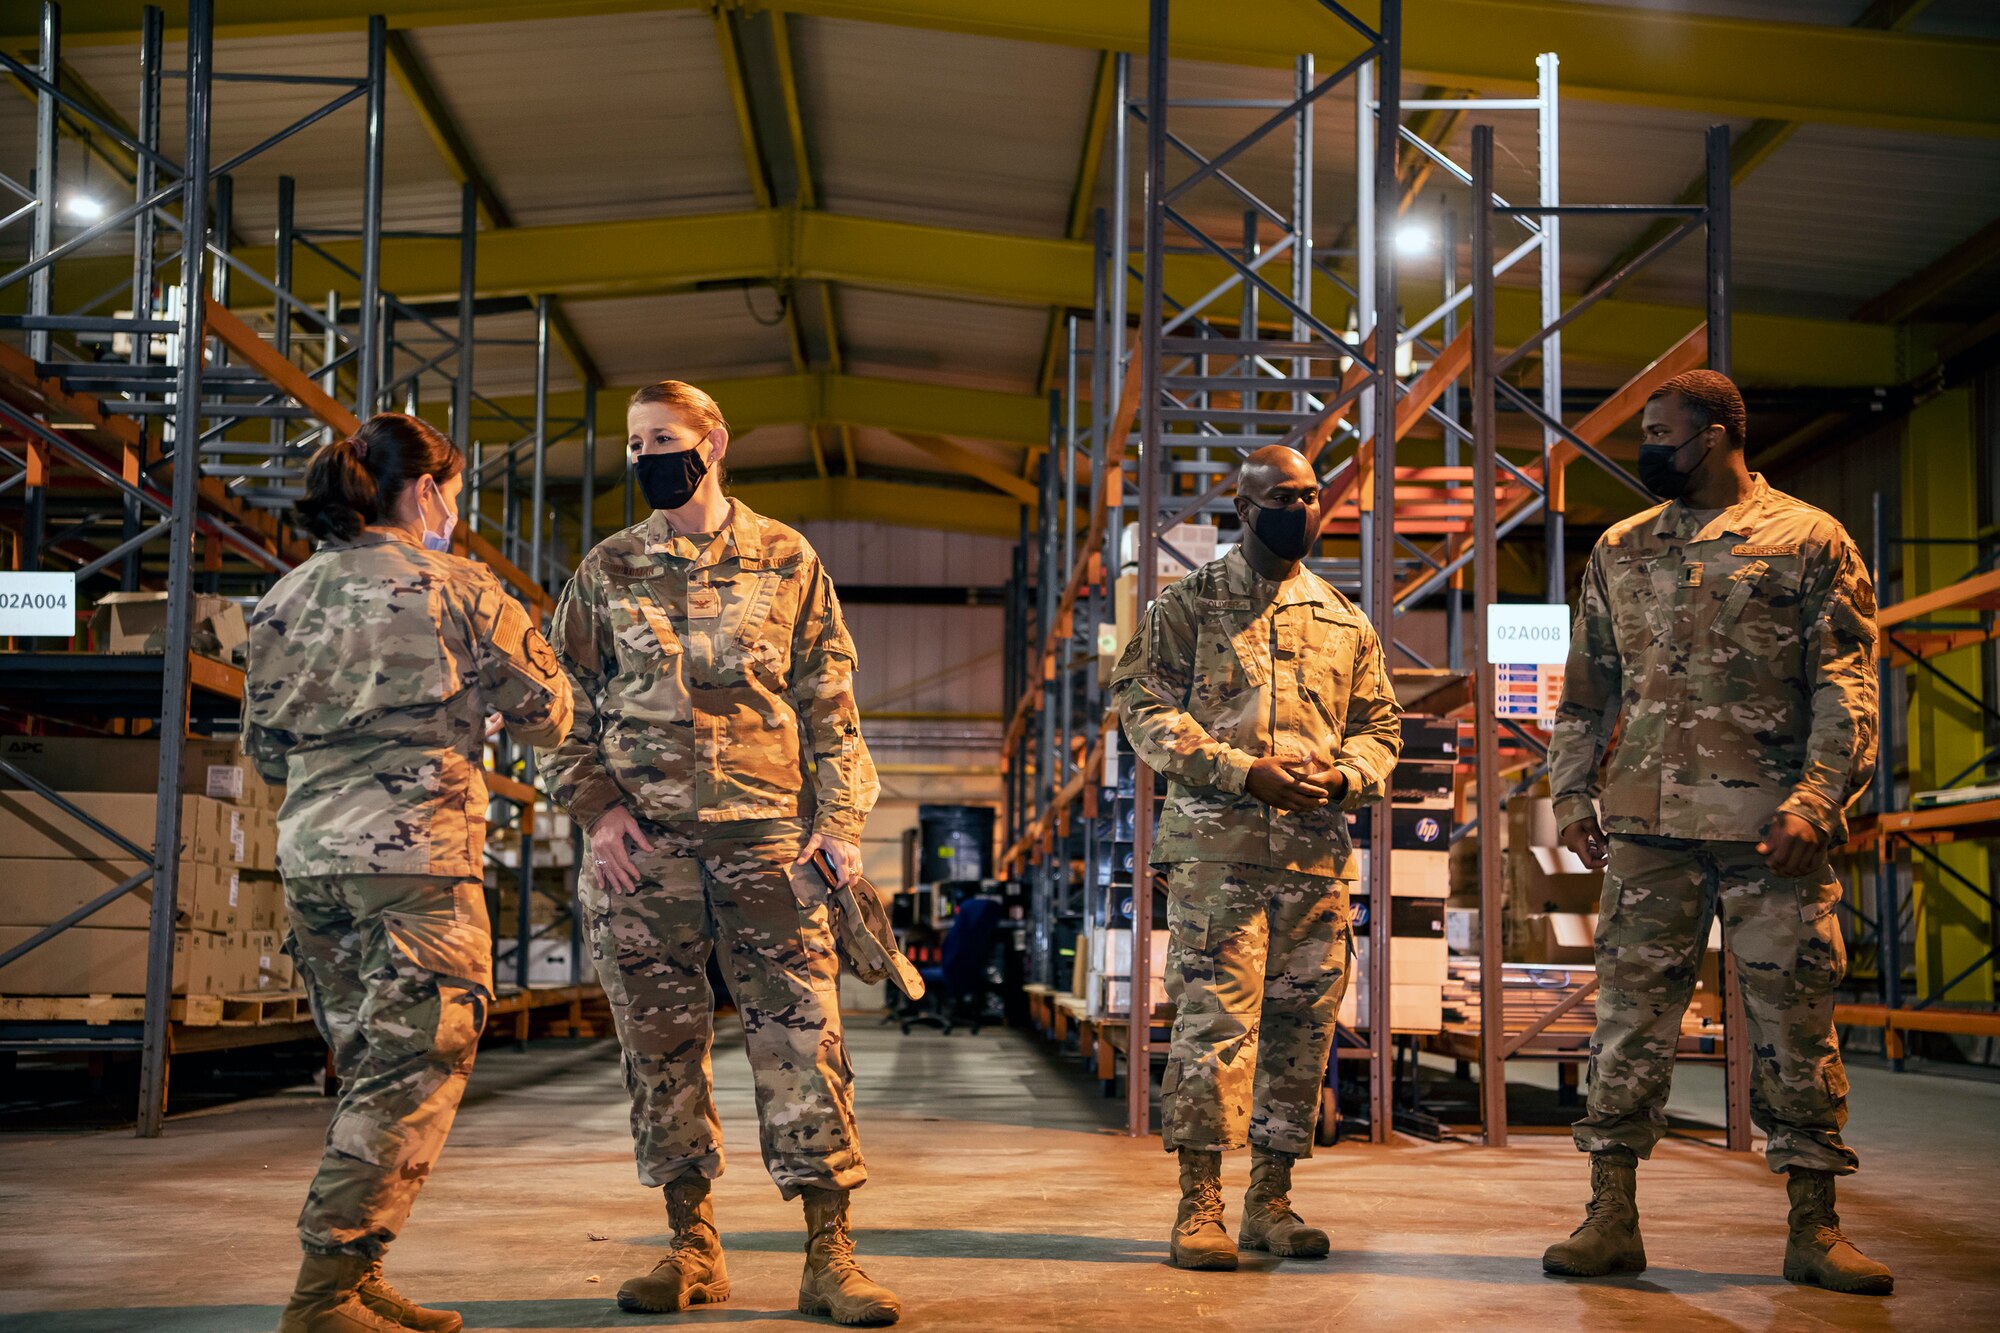 Col. Lisa Wildman, center left, 501st Combat Support Wing vice commander, and Chief Master Sgt. Ralph Oliver, center right, 423d Air Base Group group senior enlisted leader speak with Airmen during Ability to Survive and Operate training at RAF Alconbury, England, Aug. 27, 2021. The ATSO rodeo was designed to reinforce Airmen’s ability to properly utilize their MOPP gear in a potential chemical environment. (U.S. Air Force photo by Senior Airman Eugene Oliver)